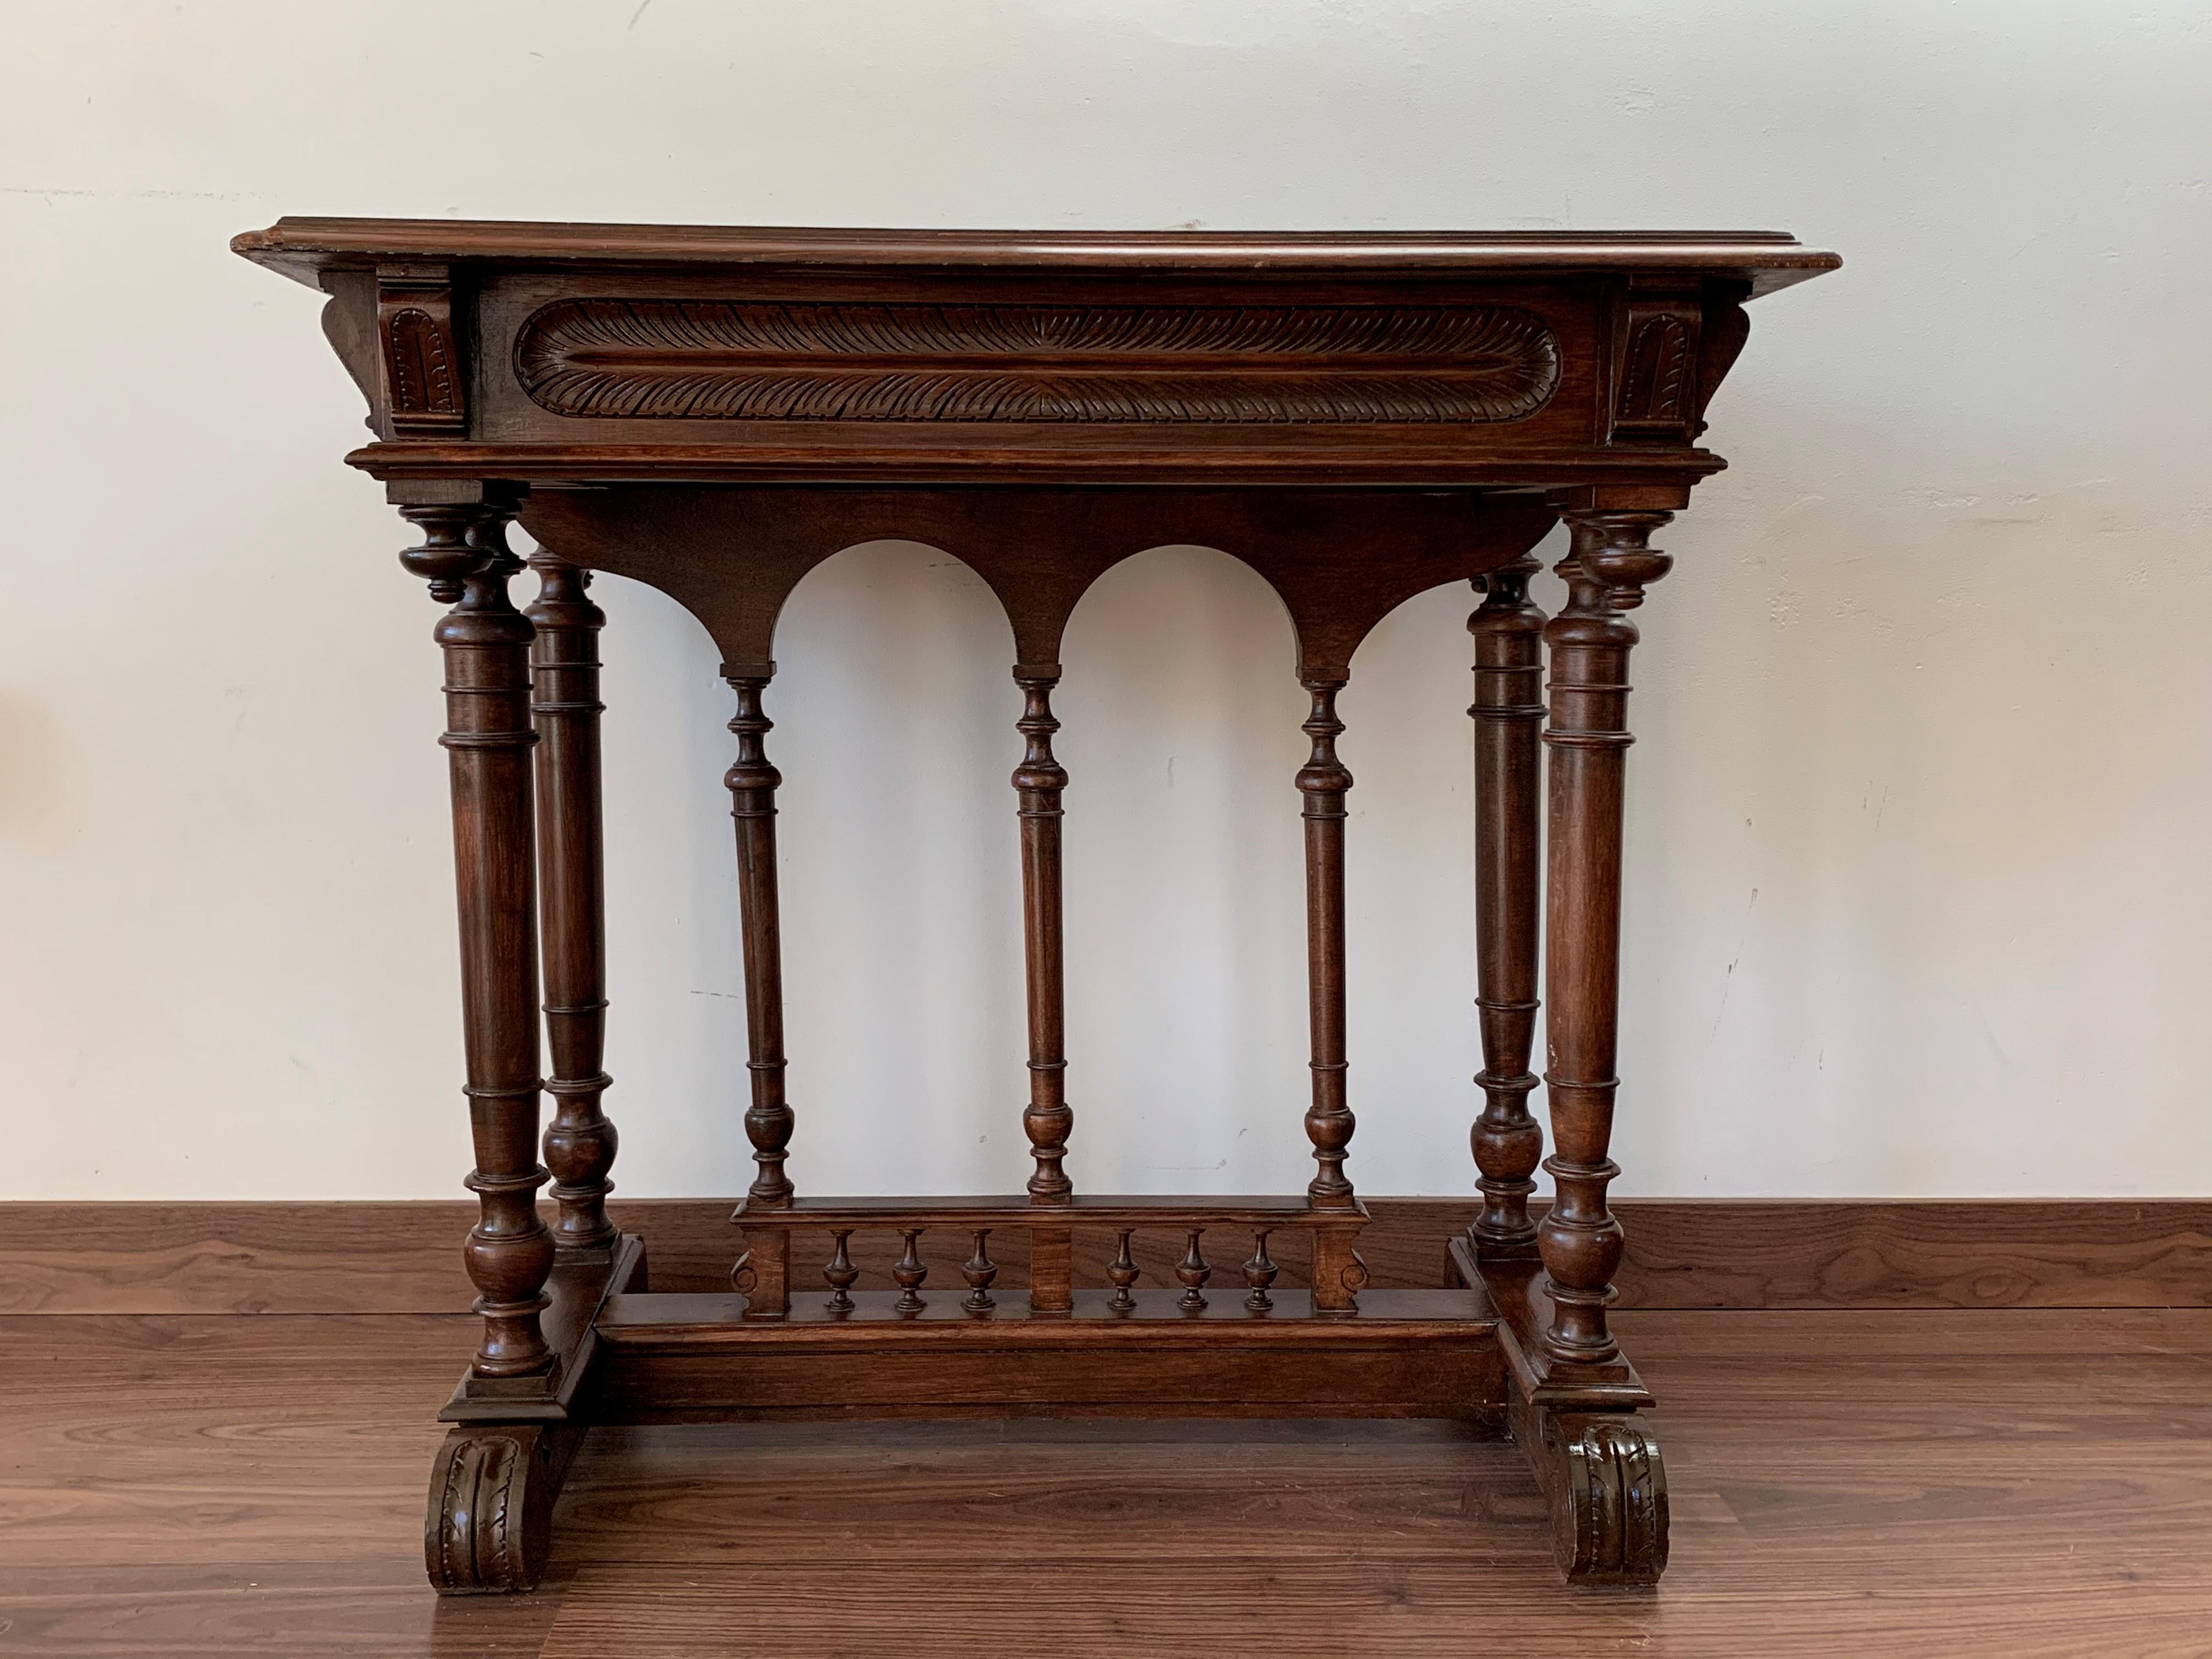 19th century Spanish farm table with wood columns stretchers, hand carved top and drawer.

An unusual form with nice shiny patina. Nice size for a side or end table, or as a lamp table. Graceful carved supports with a shaped edge on the top. The